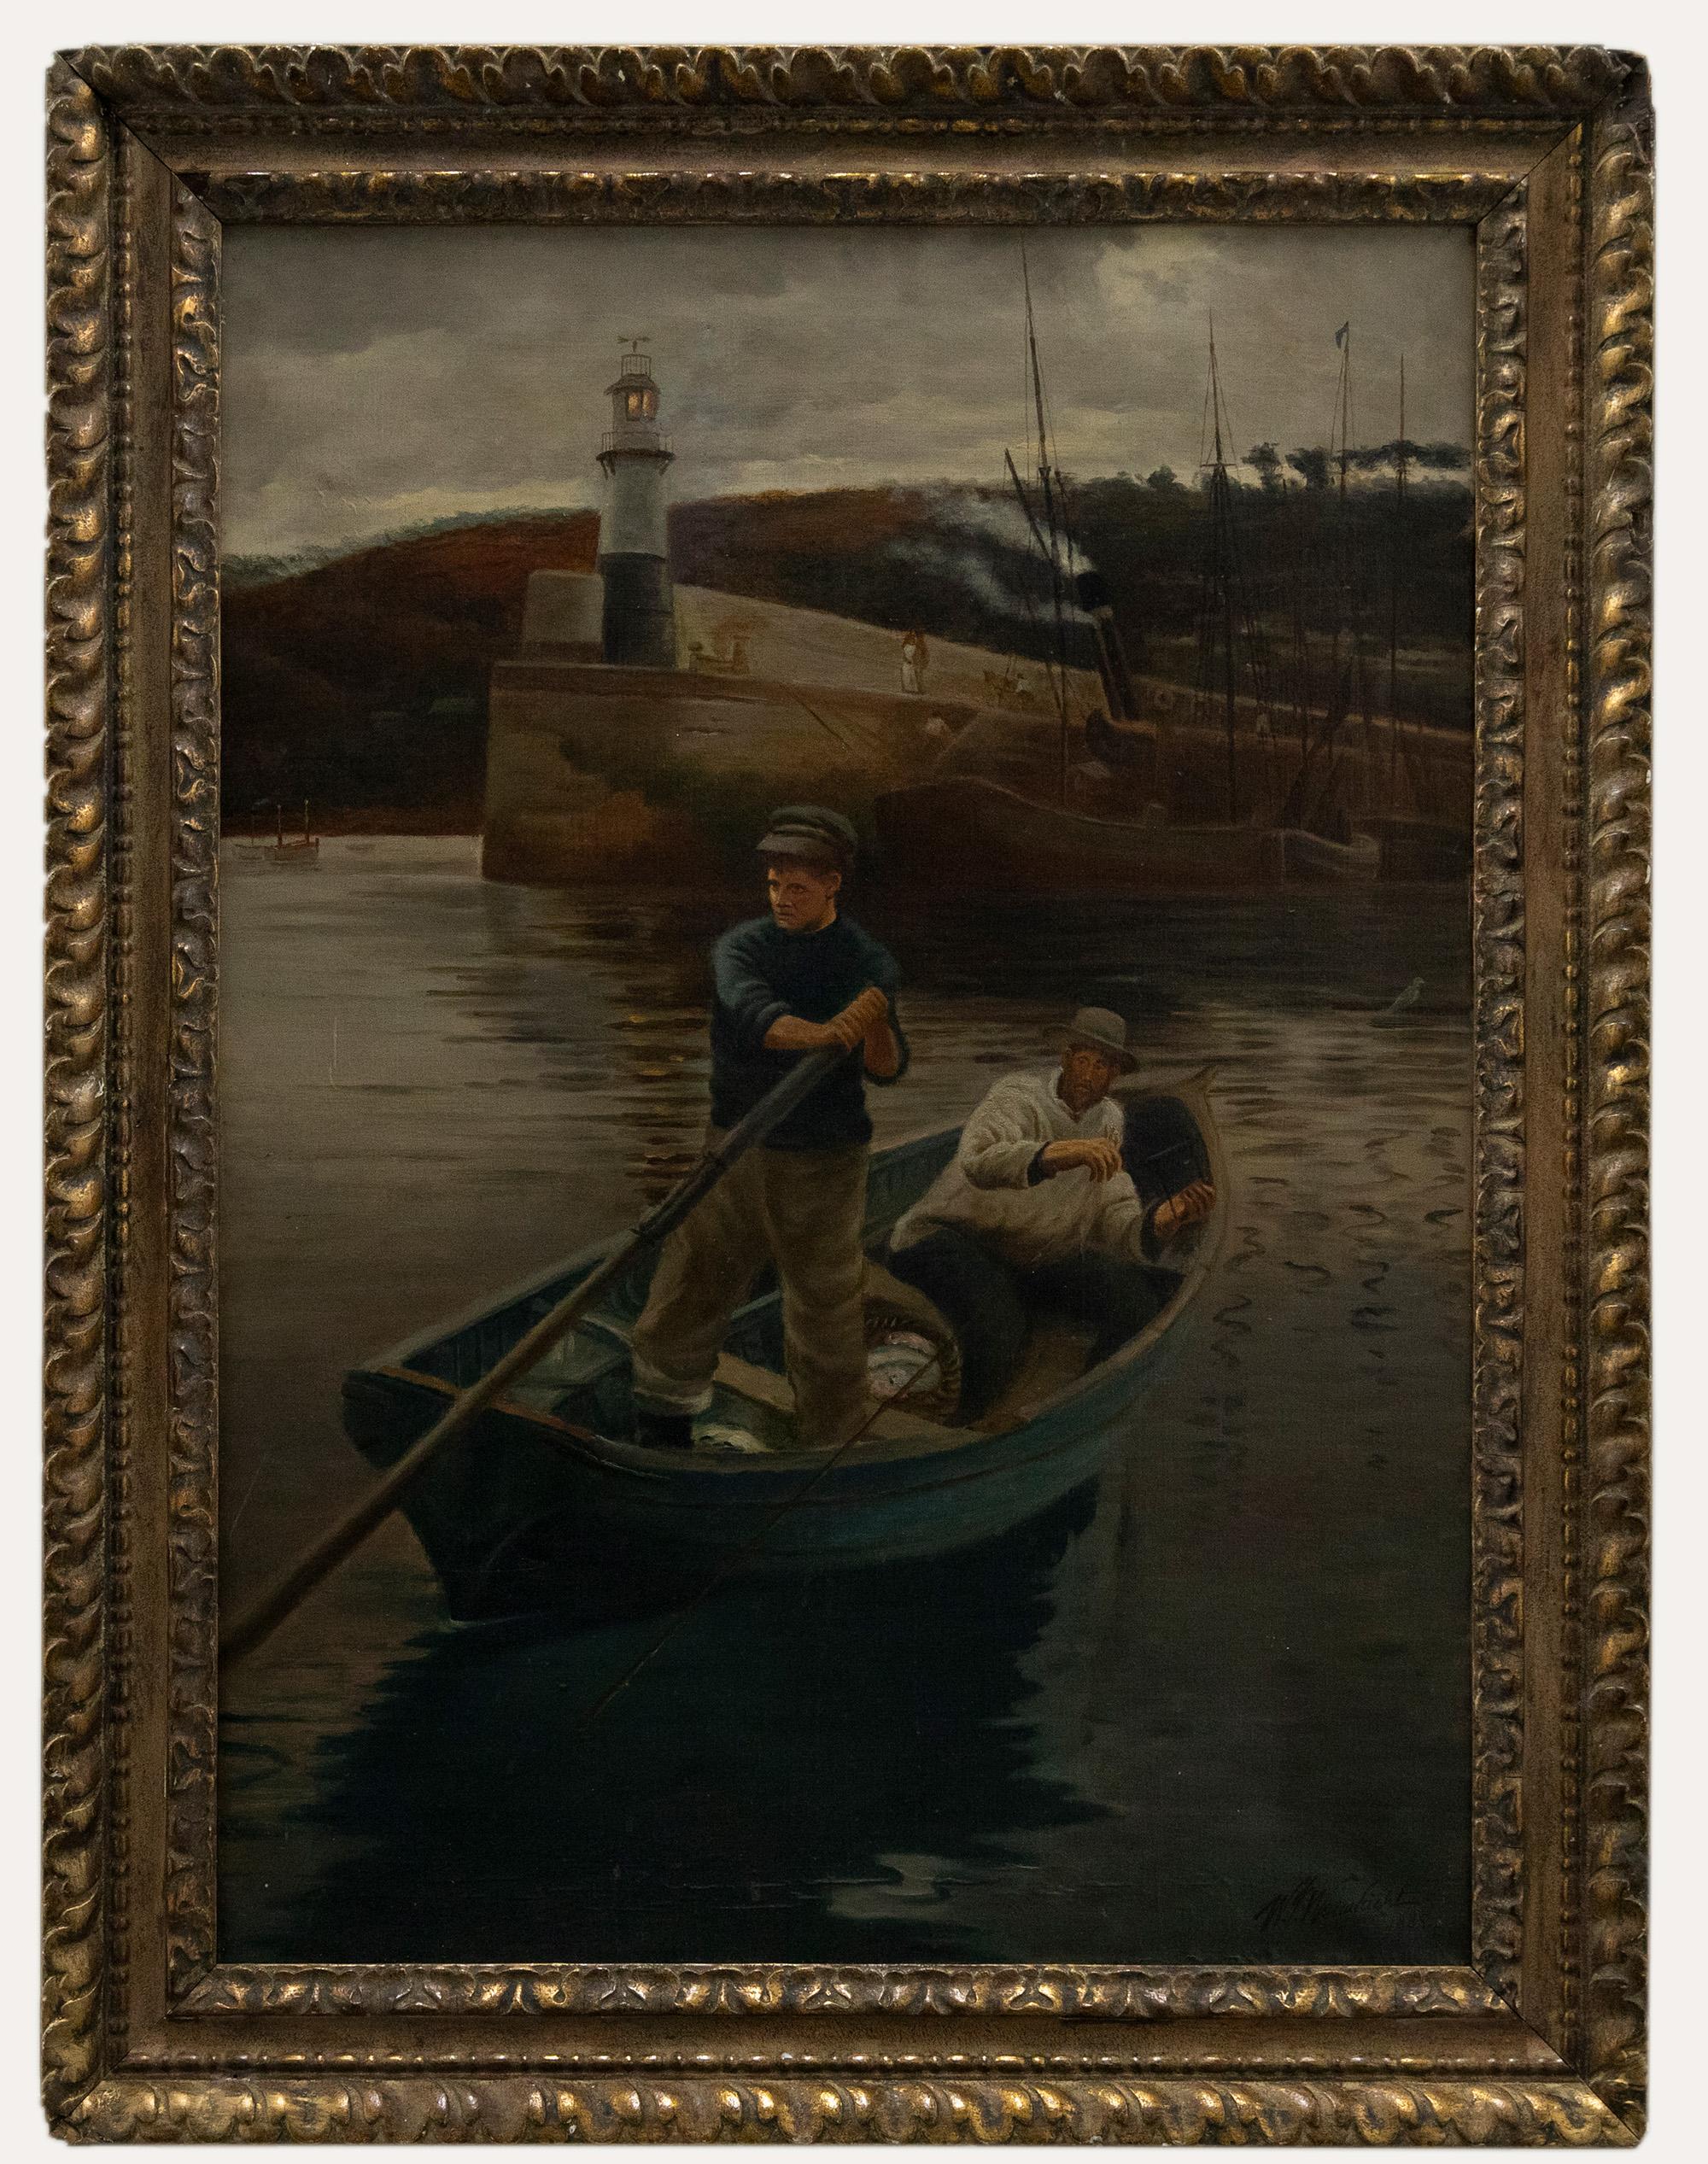 Unknown Figurative Painting - William John Wainwright after Stanhope Forbes  - 1885 Oil, The Lighthouse